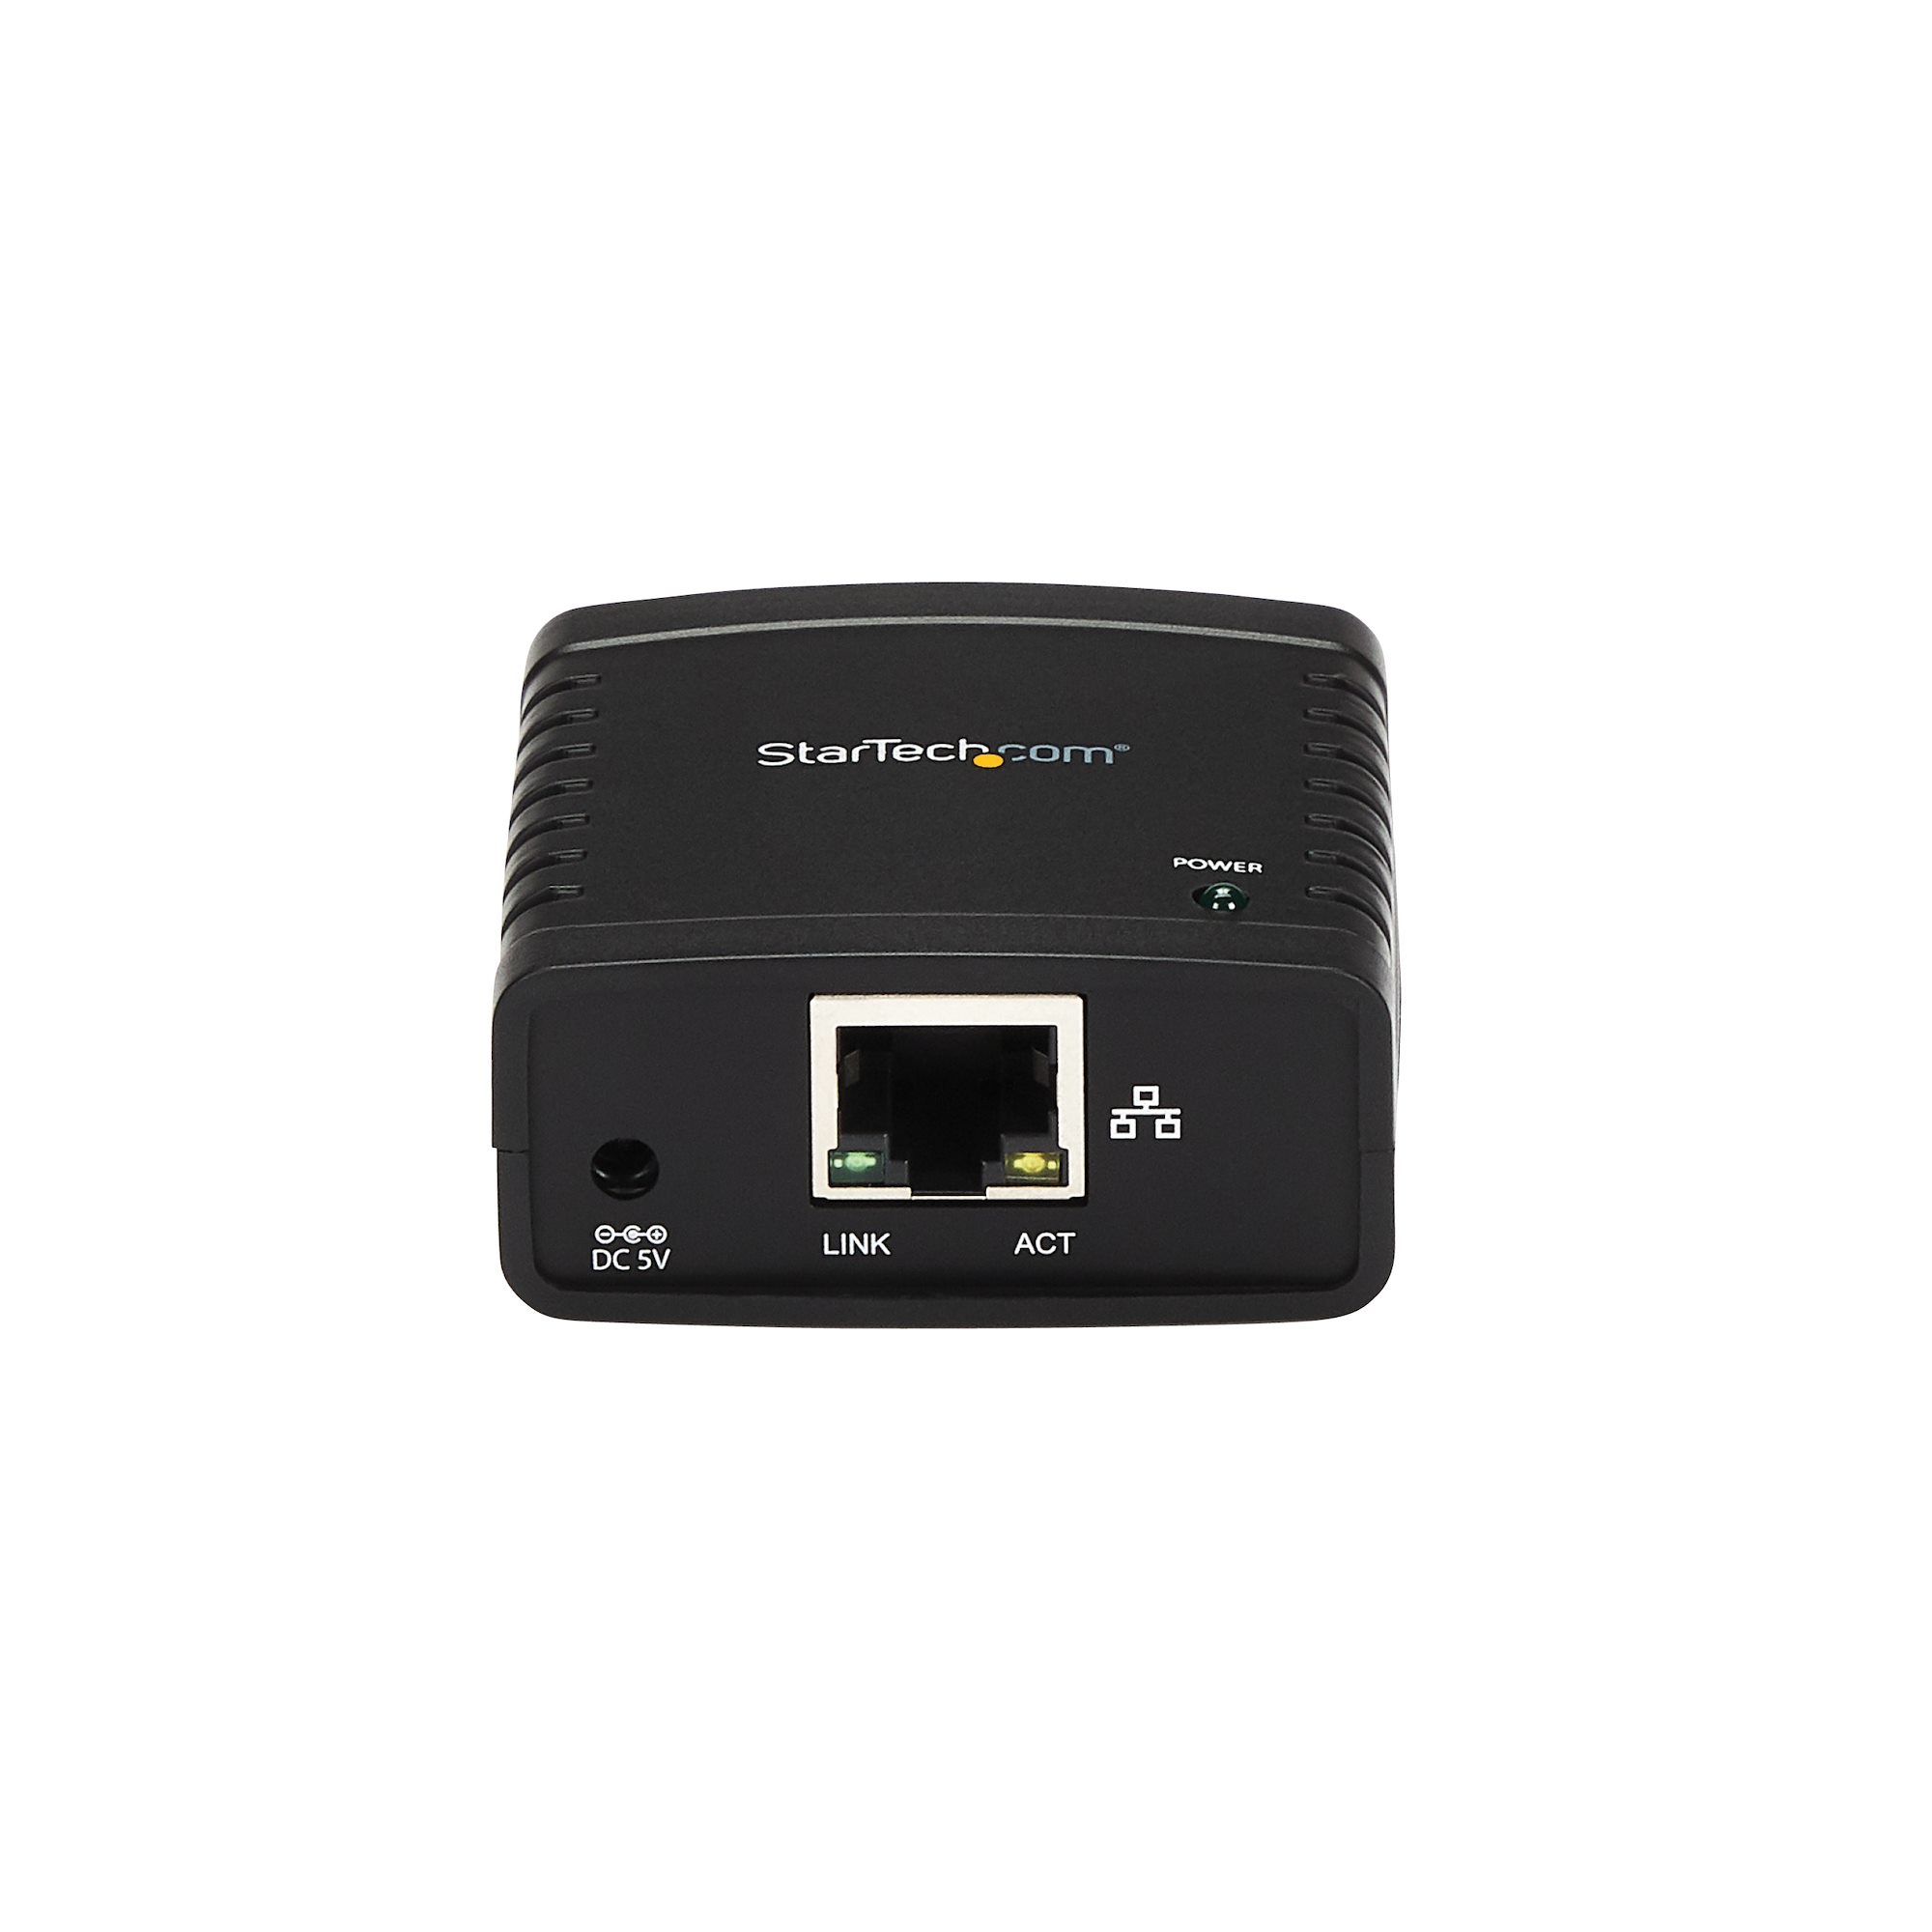 J6035A#ABA HP Jetdirect External Print Server/Internet Connector for USB Printers and Ethernet Networks 